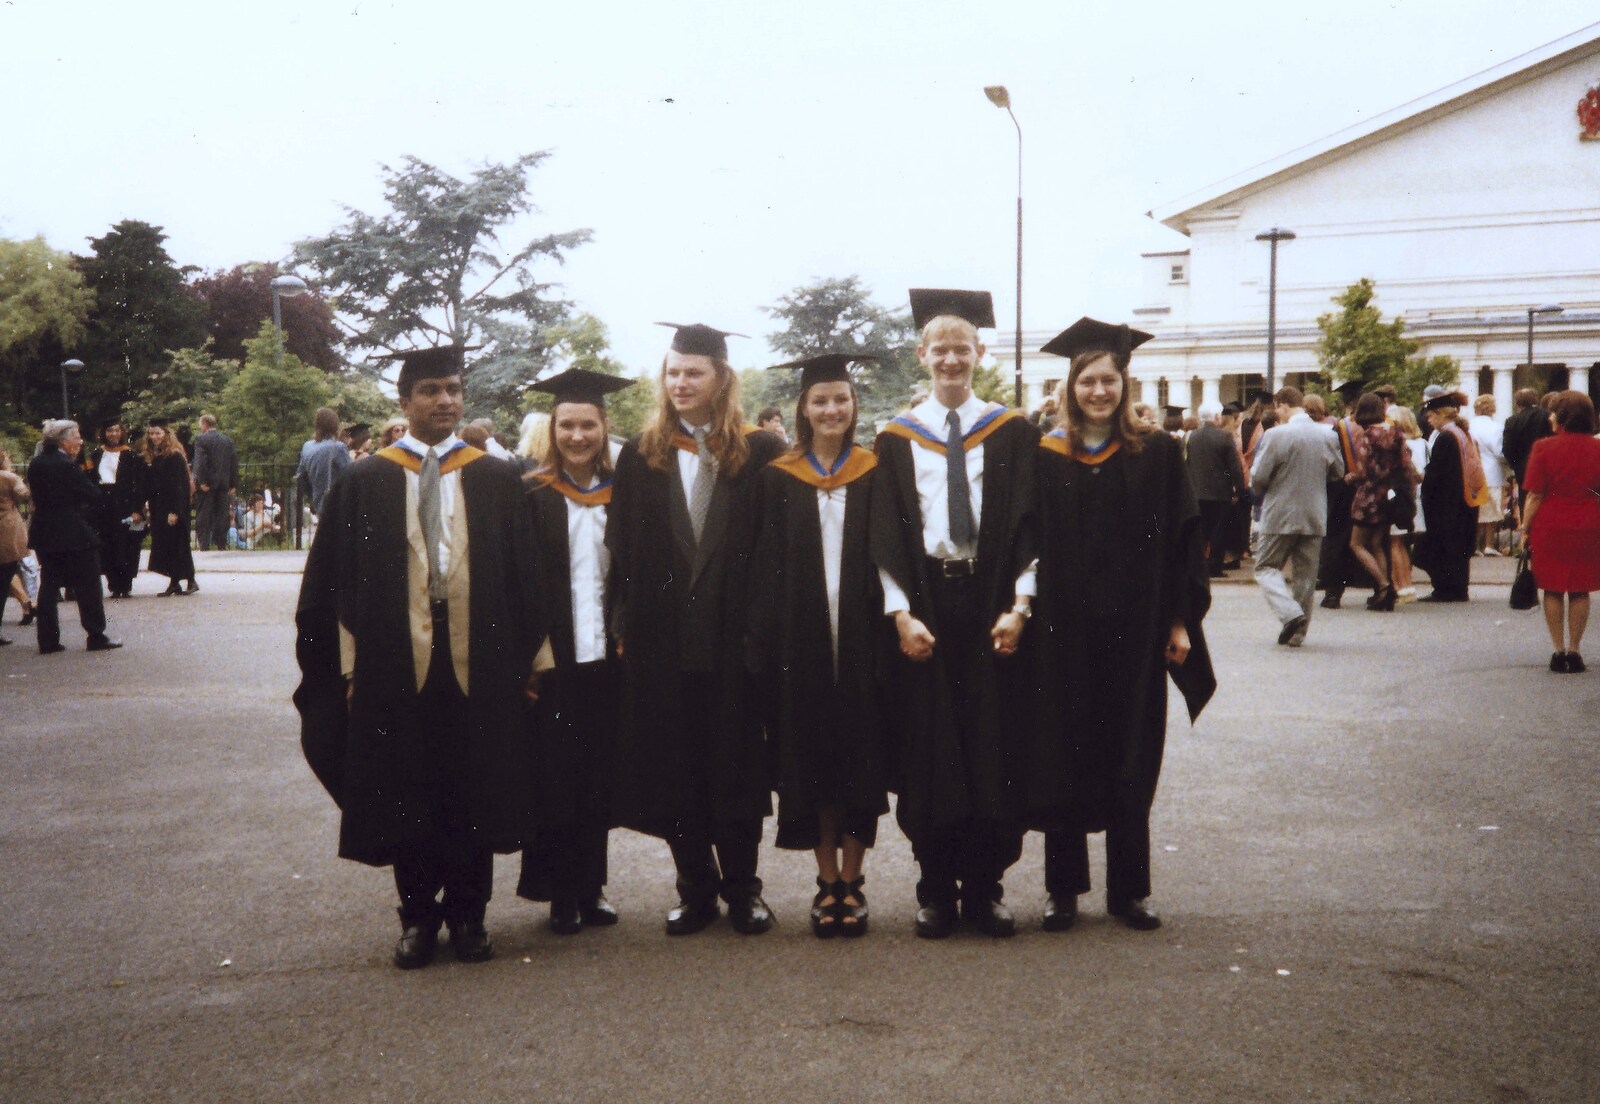 Sis Graduates from De Montfort, Leicester, Leicestershire - 9th August 1997: The graduation gang